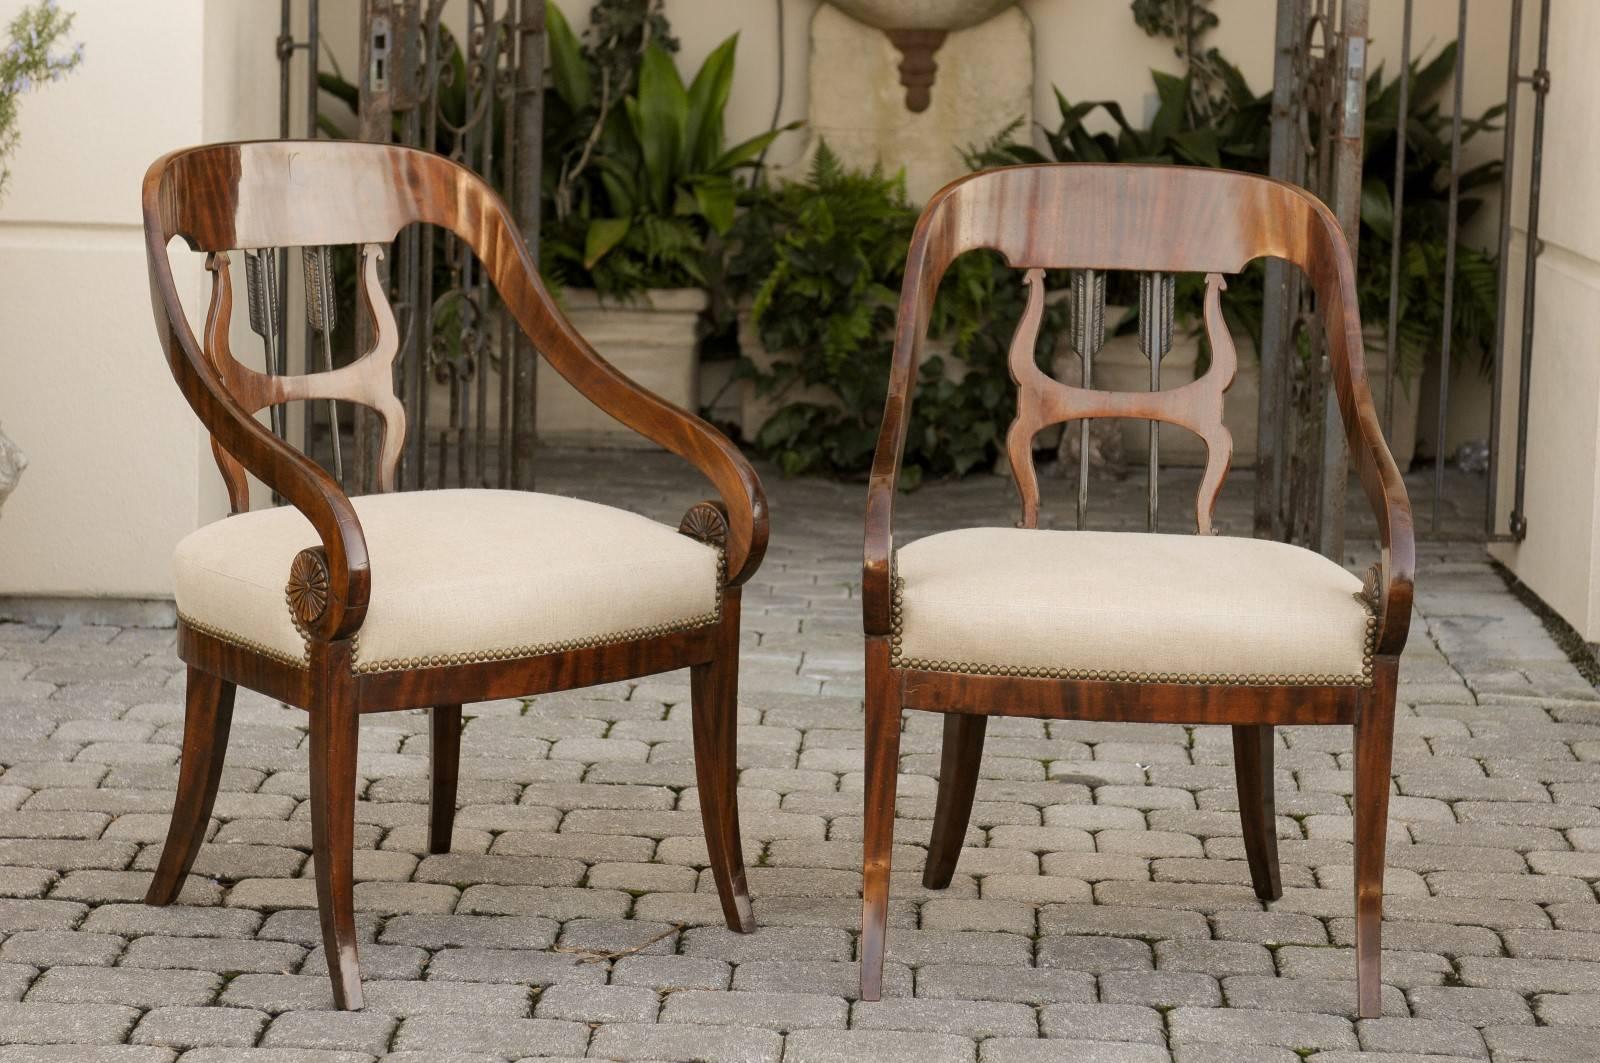 A pair of Austrian Biedermeier armchairs from the mid 19th century with arrow motifs, scrolled arms and upholstered seats. Each of this pair of Biedermeier armchairs features an exquisite curved back adorned with two dark colored arrows pointing